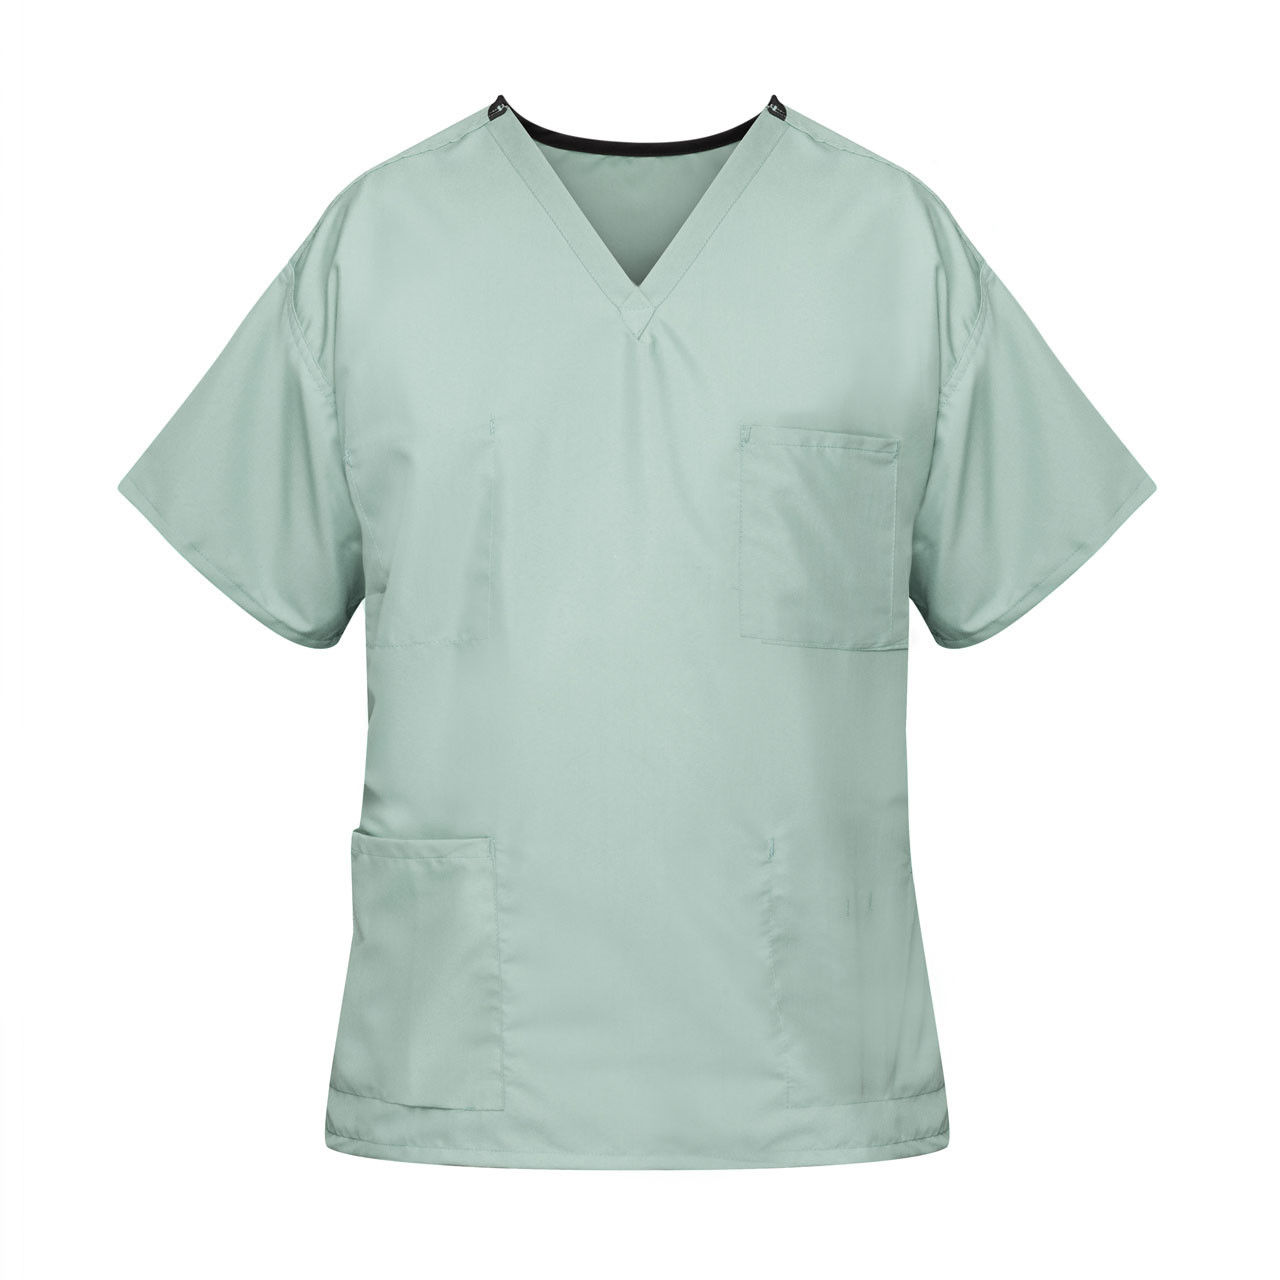 What is the design of the neck binding in the Misty Green Scrub Top?